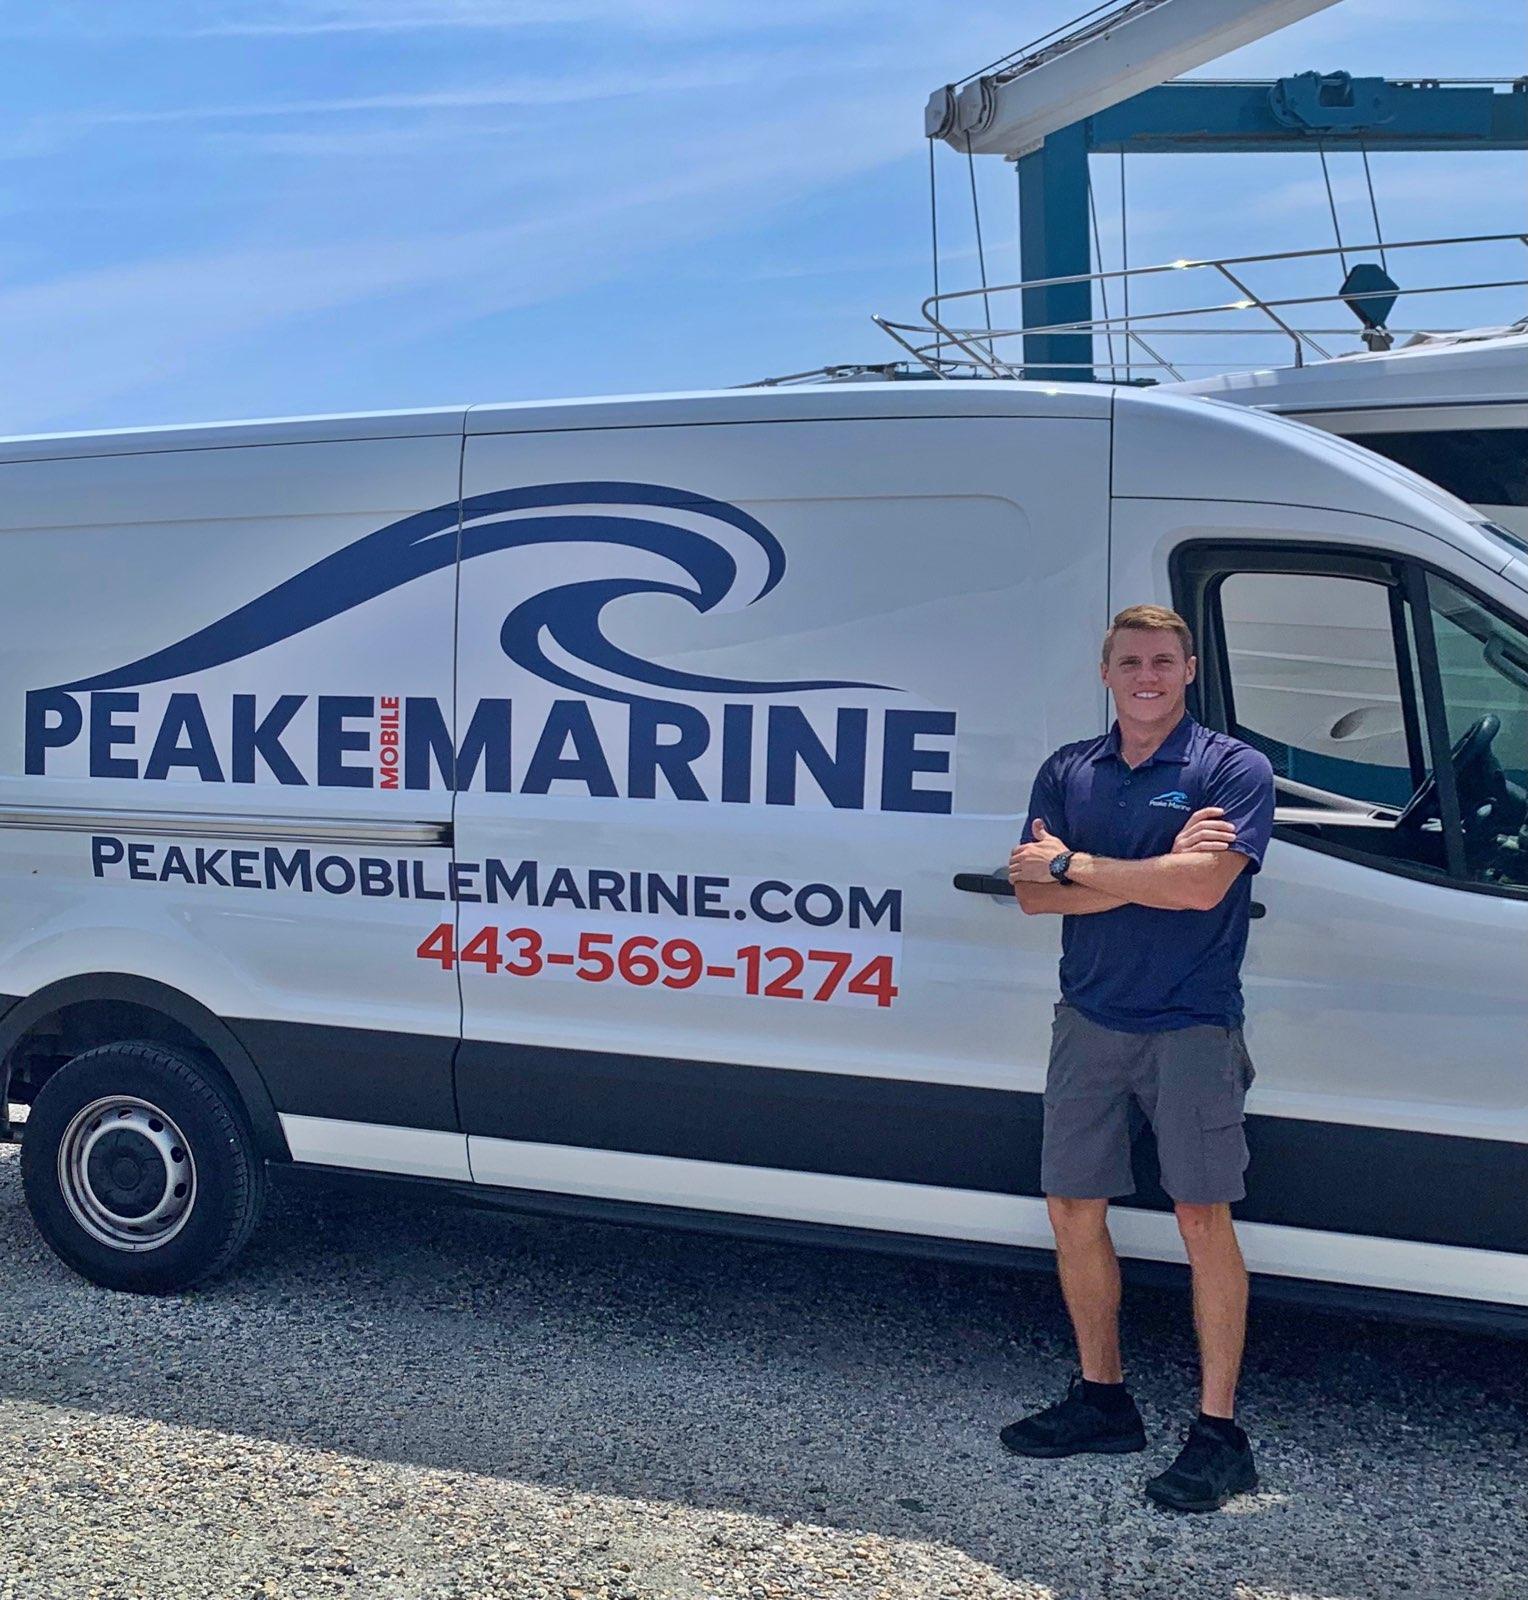 Mobile marine service business shows success of MTAM on-the-job